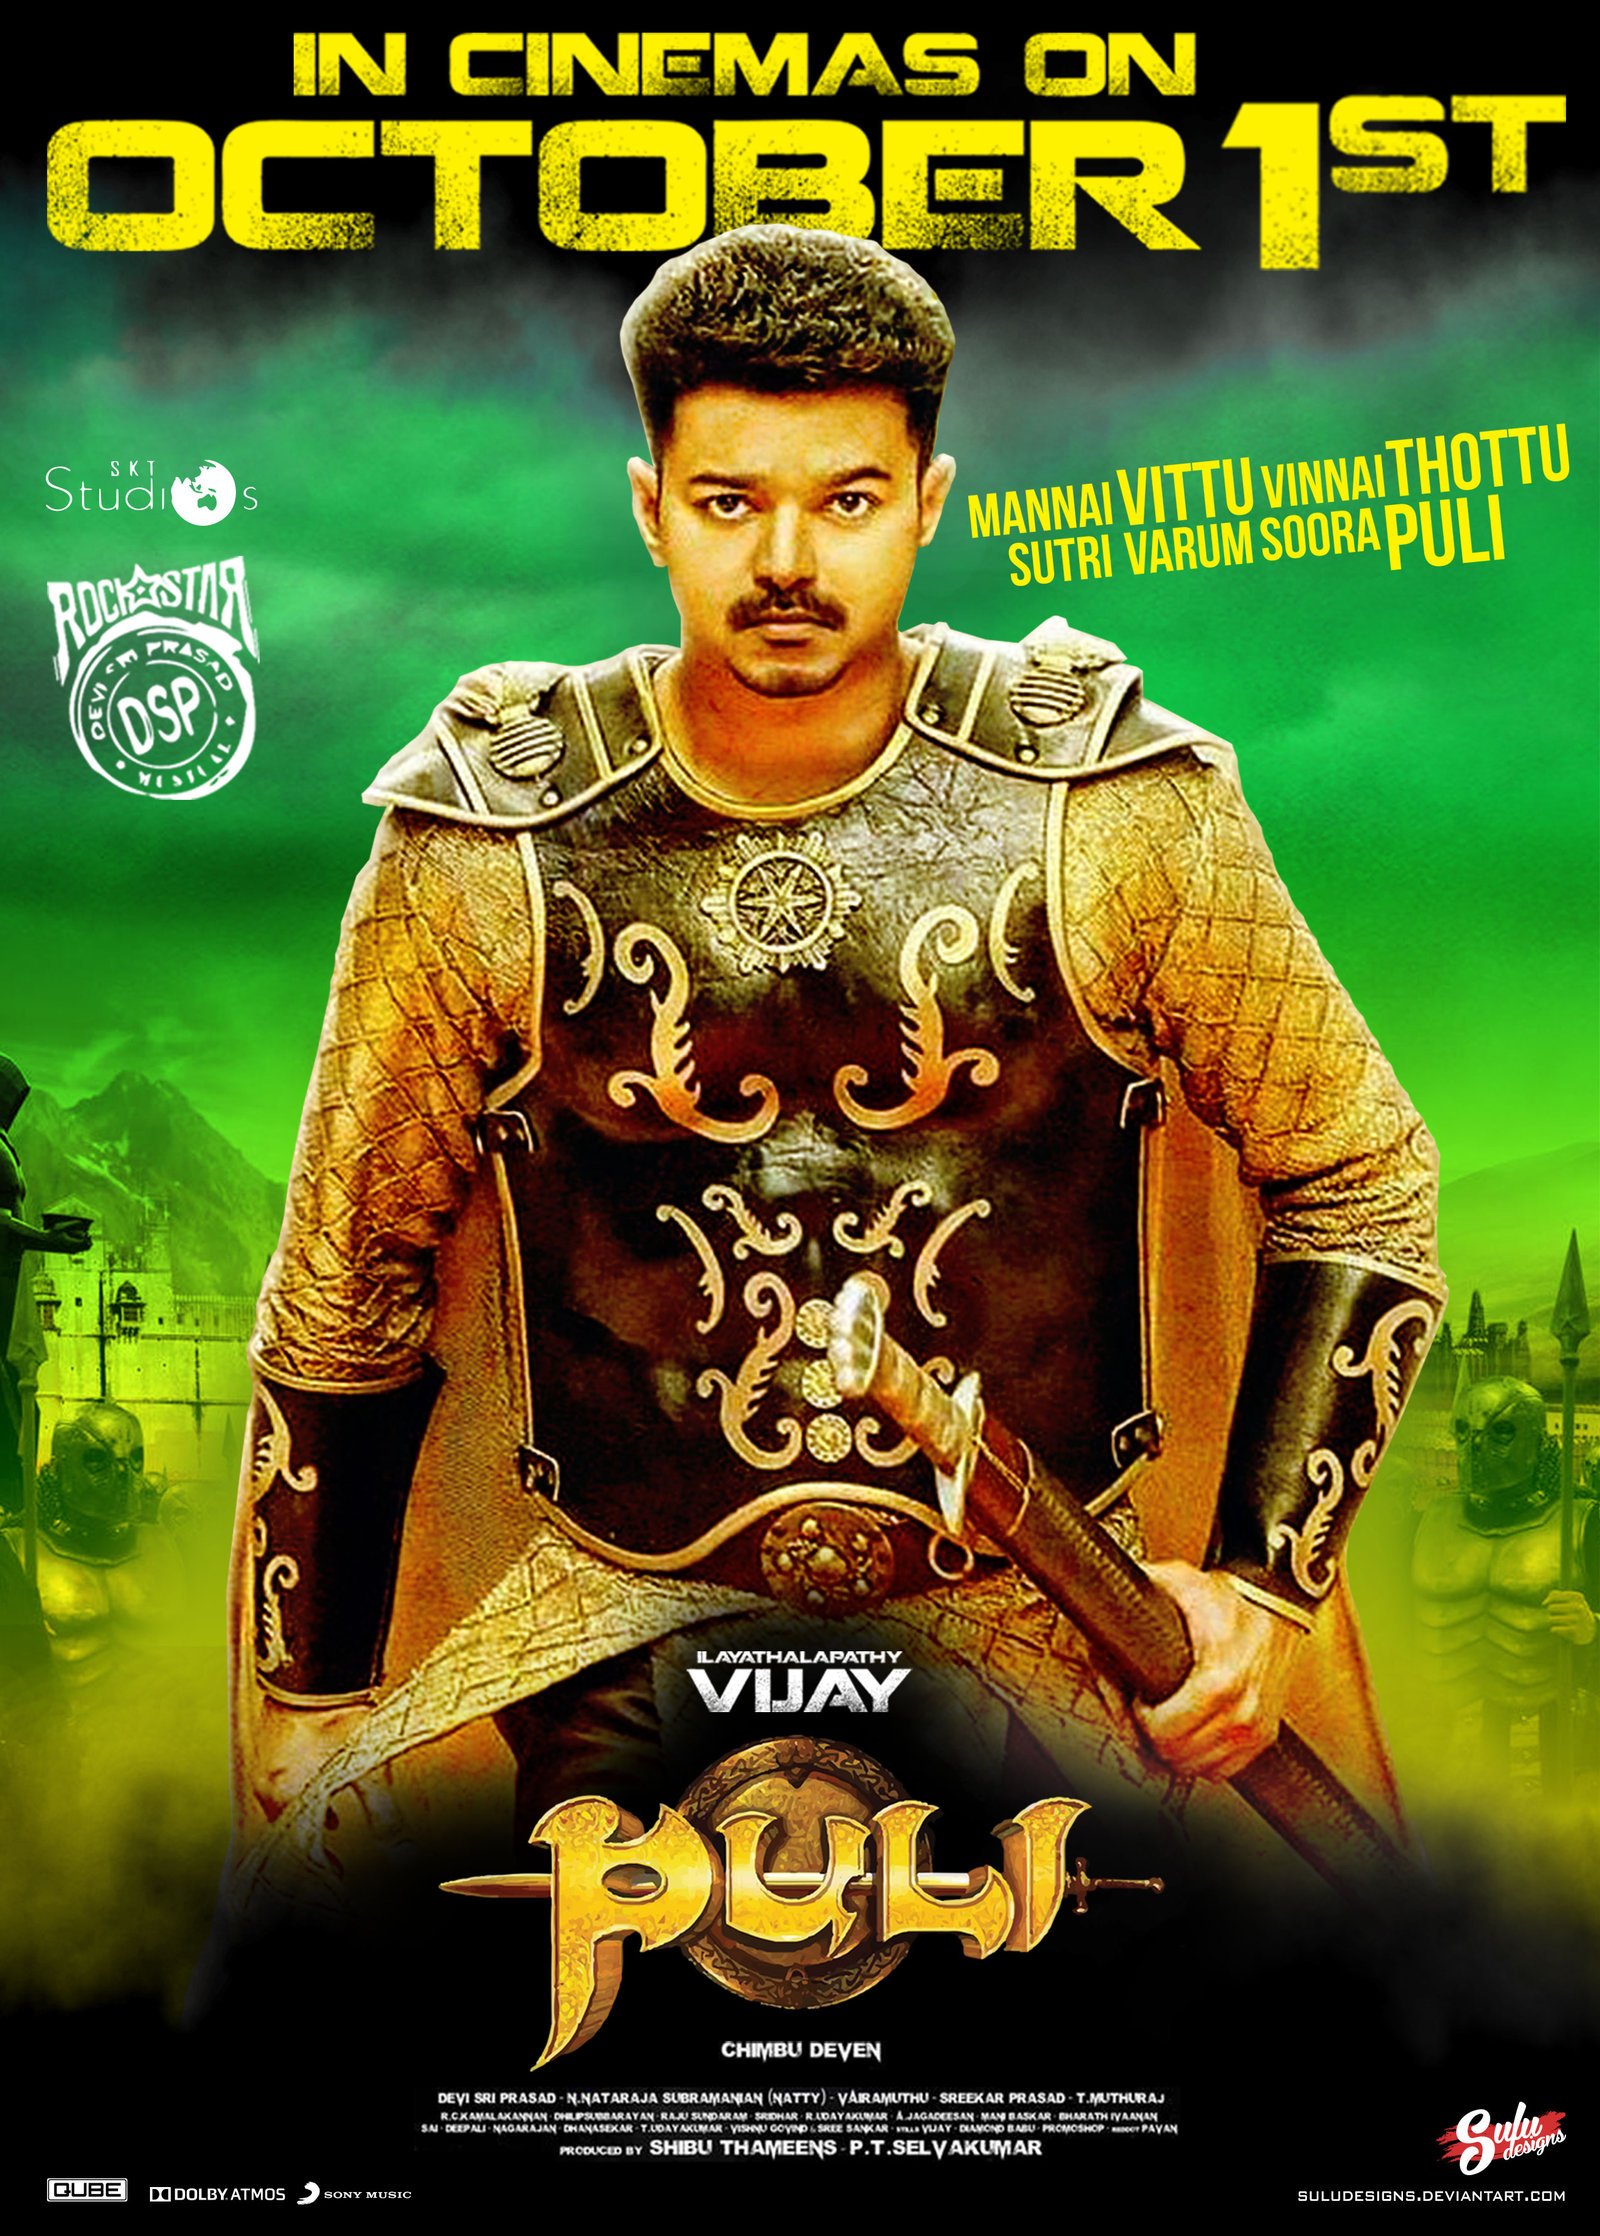 Tamil poster of the movie Puli